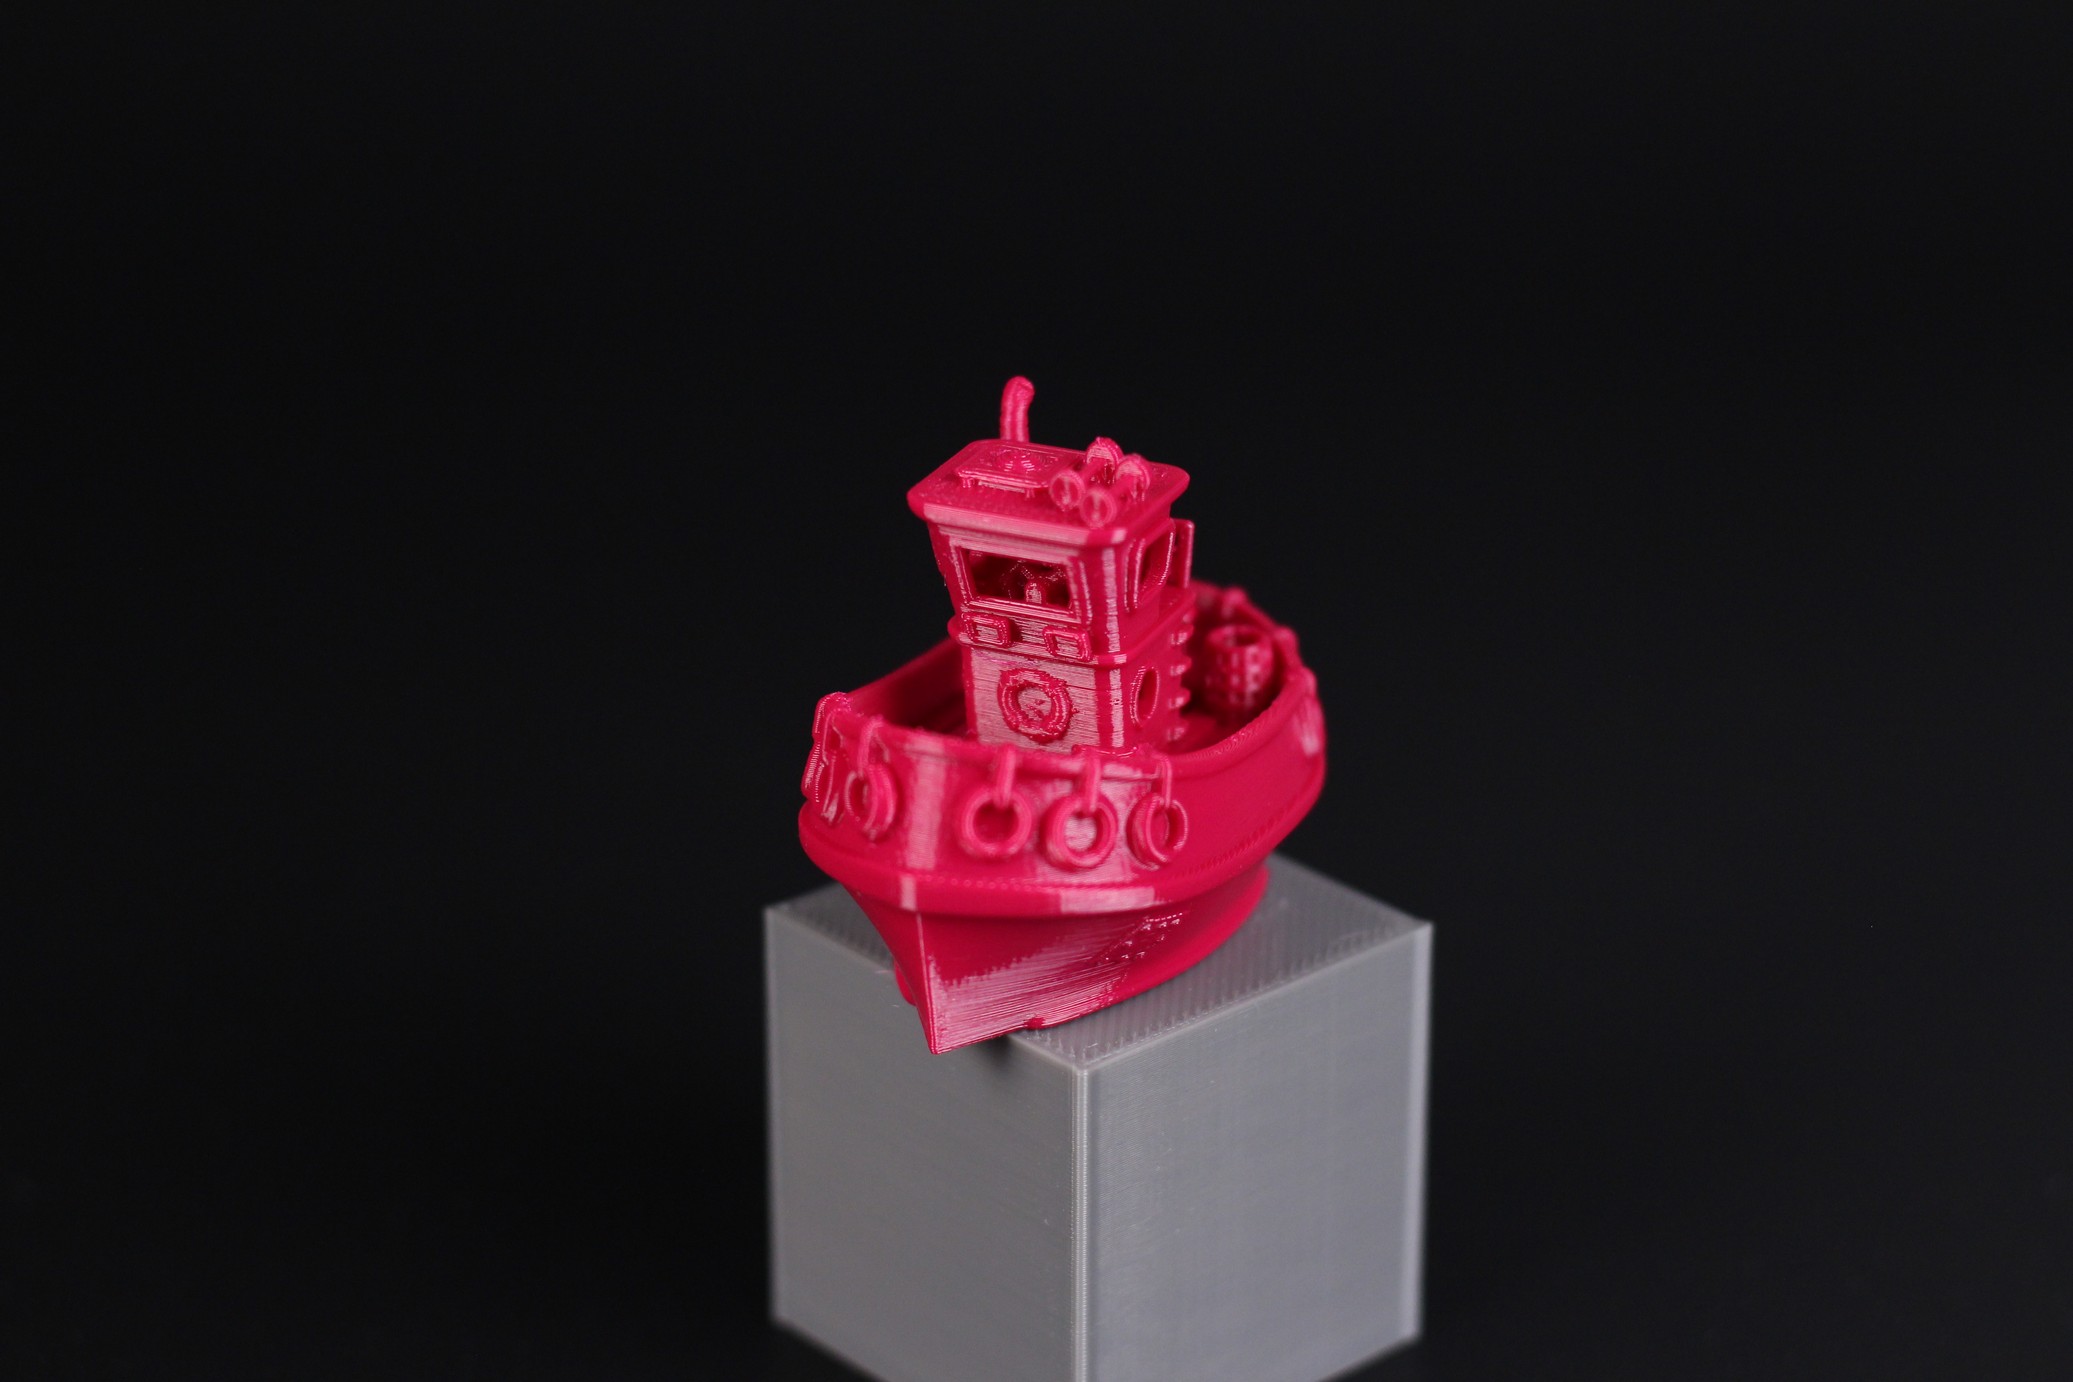 PETG Tubboat printed on Anycubic Kobra 3 | Anycubic Kobra Review: The New Budget Standard